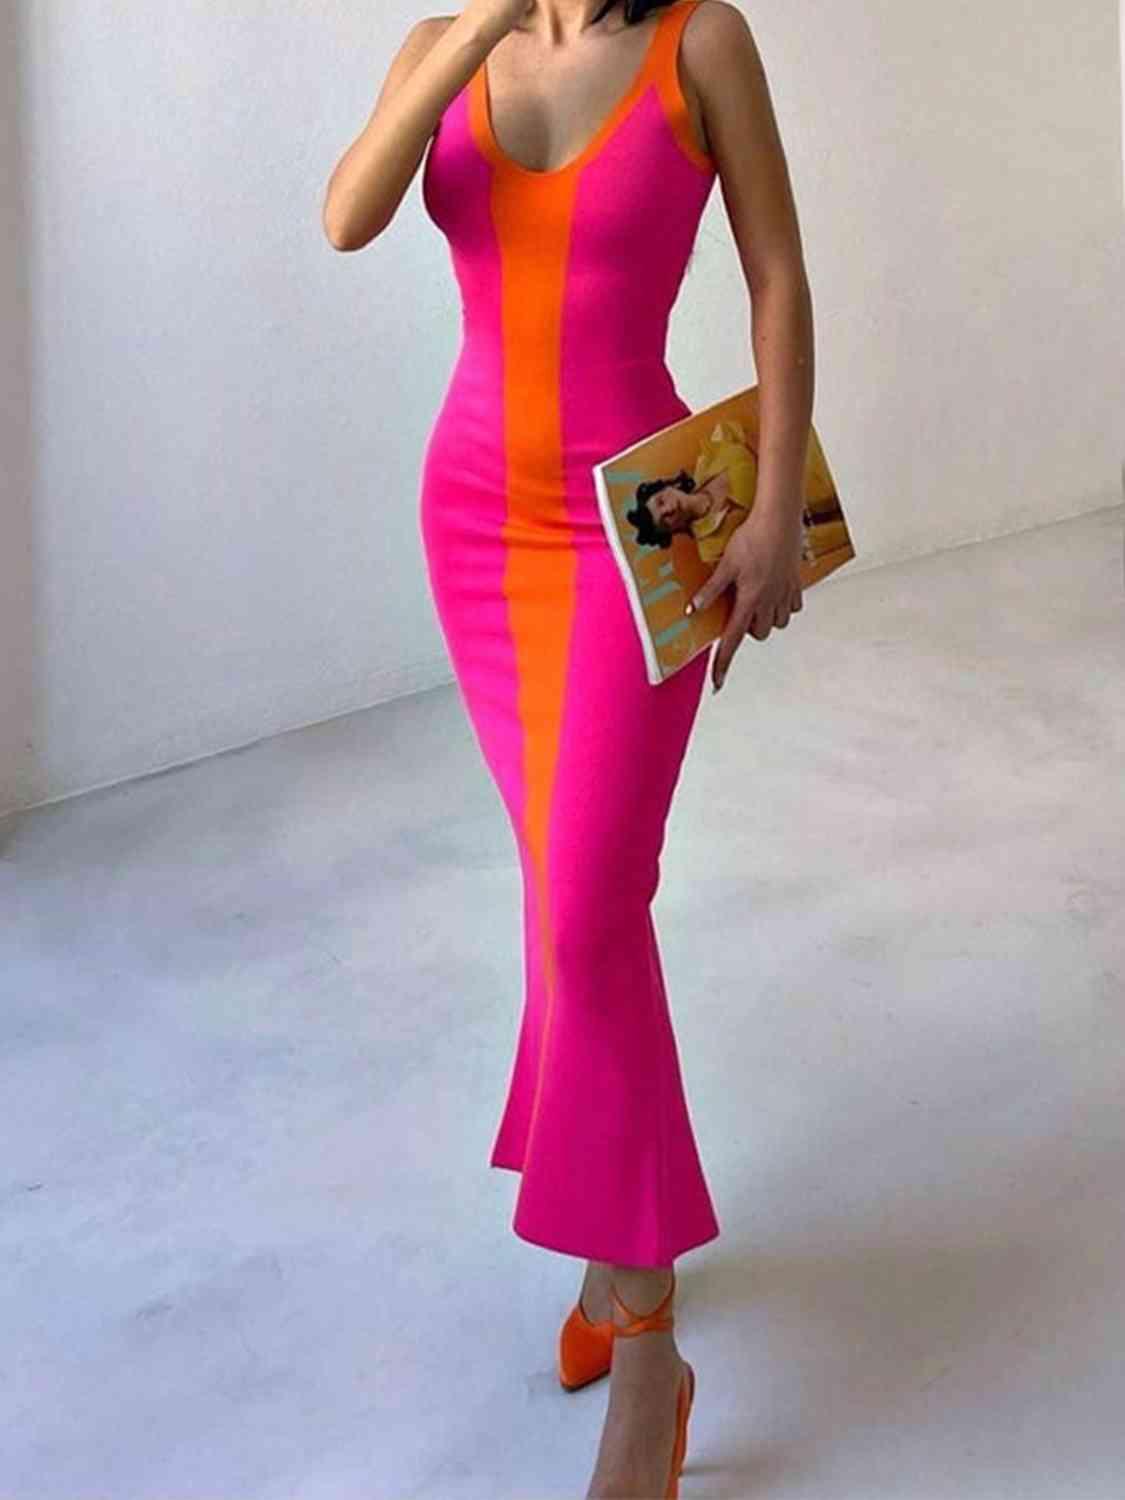 a woman in a pink and orange dress